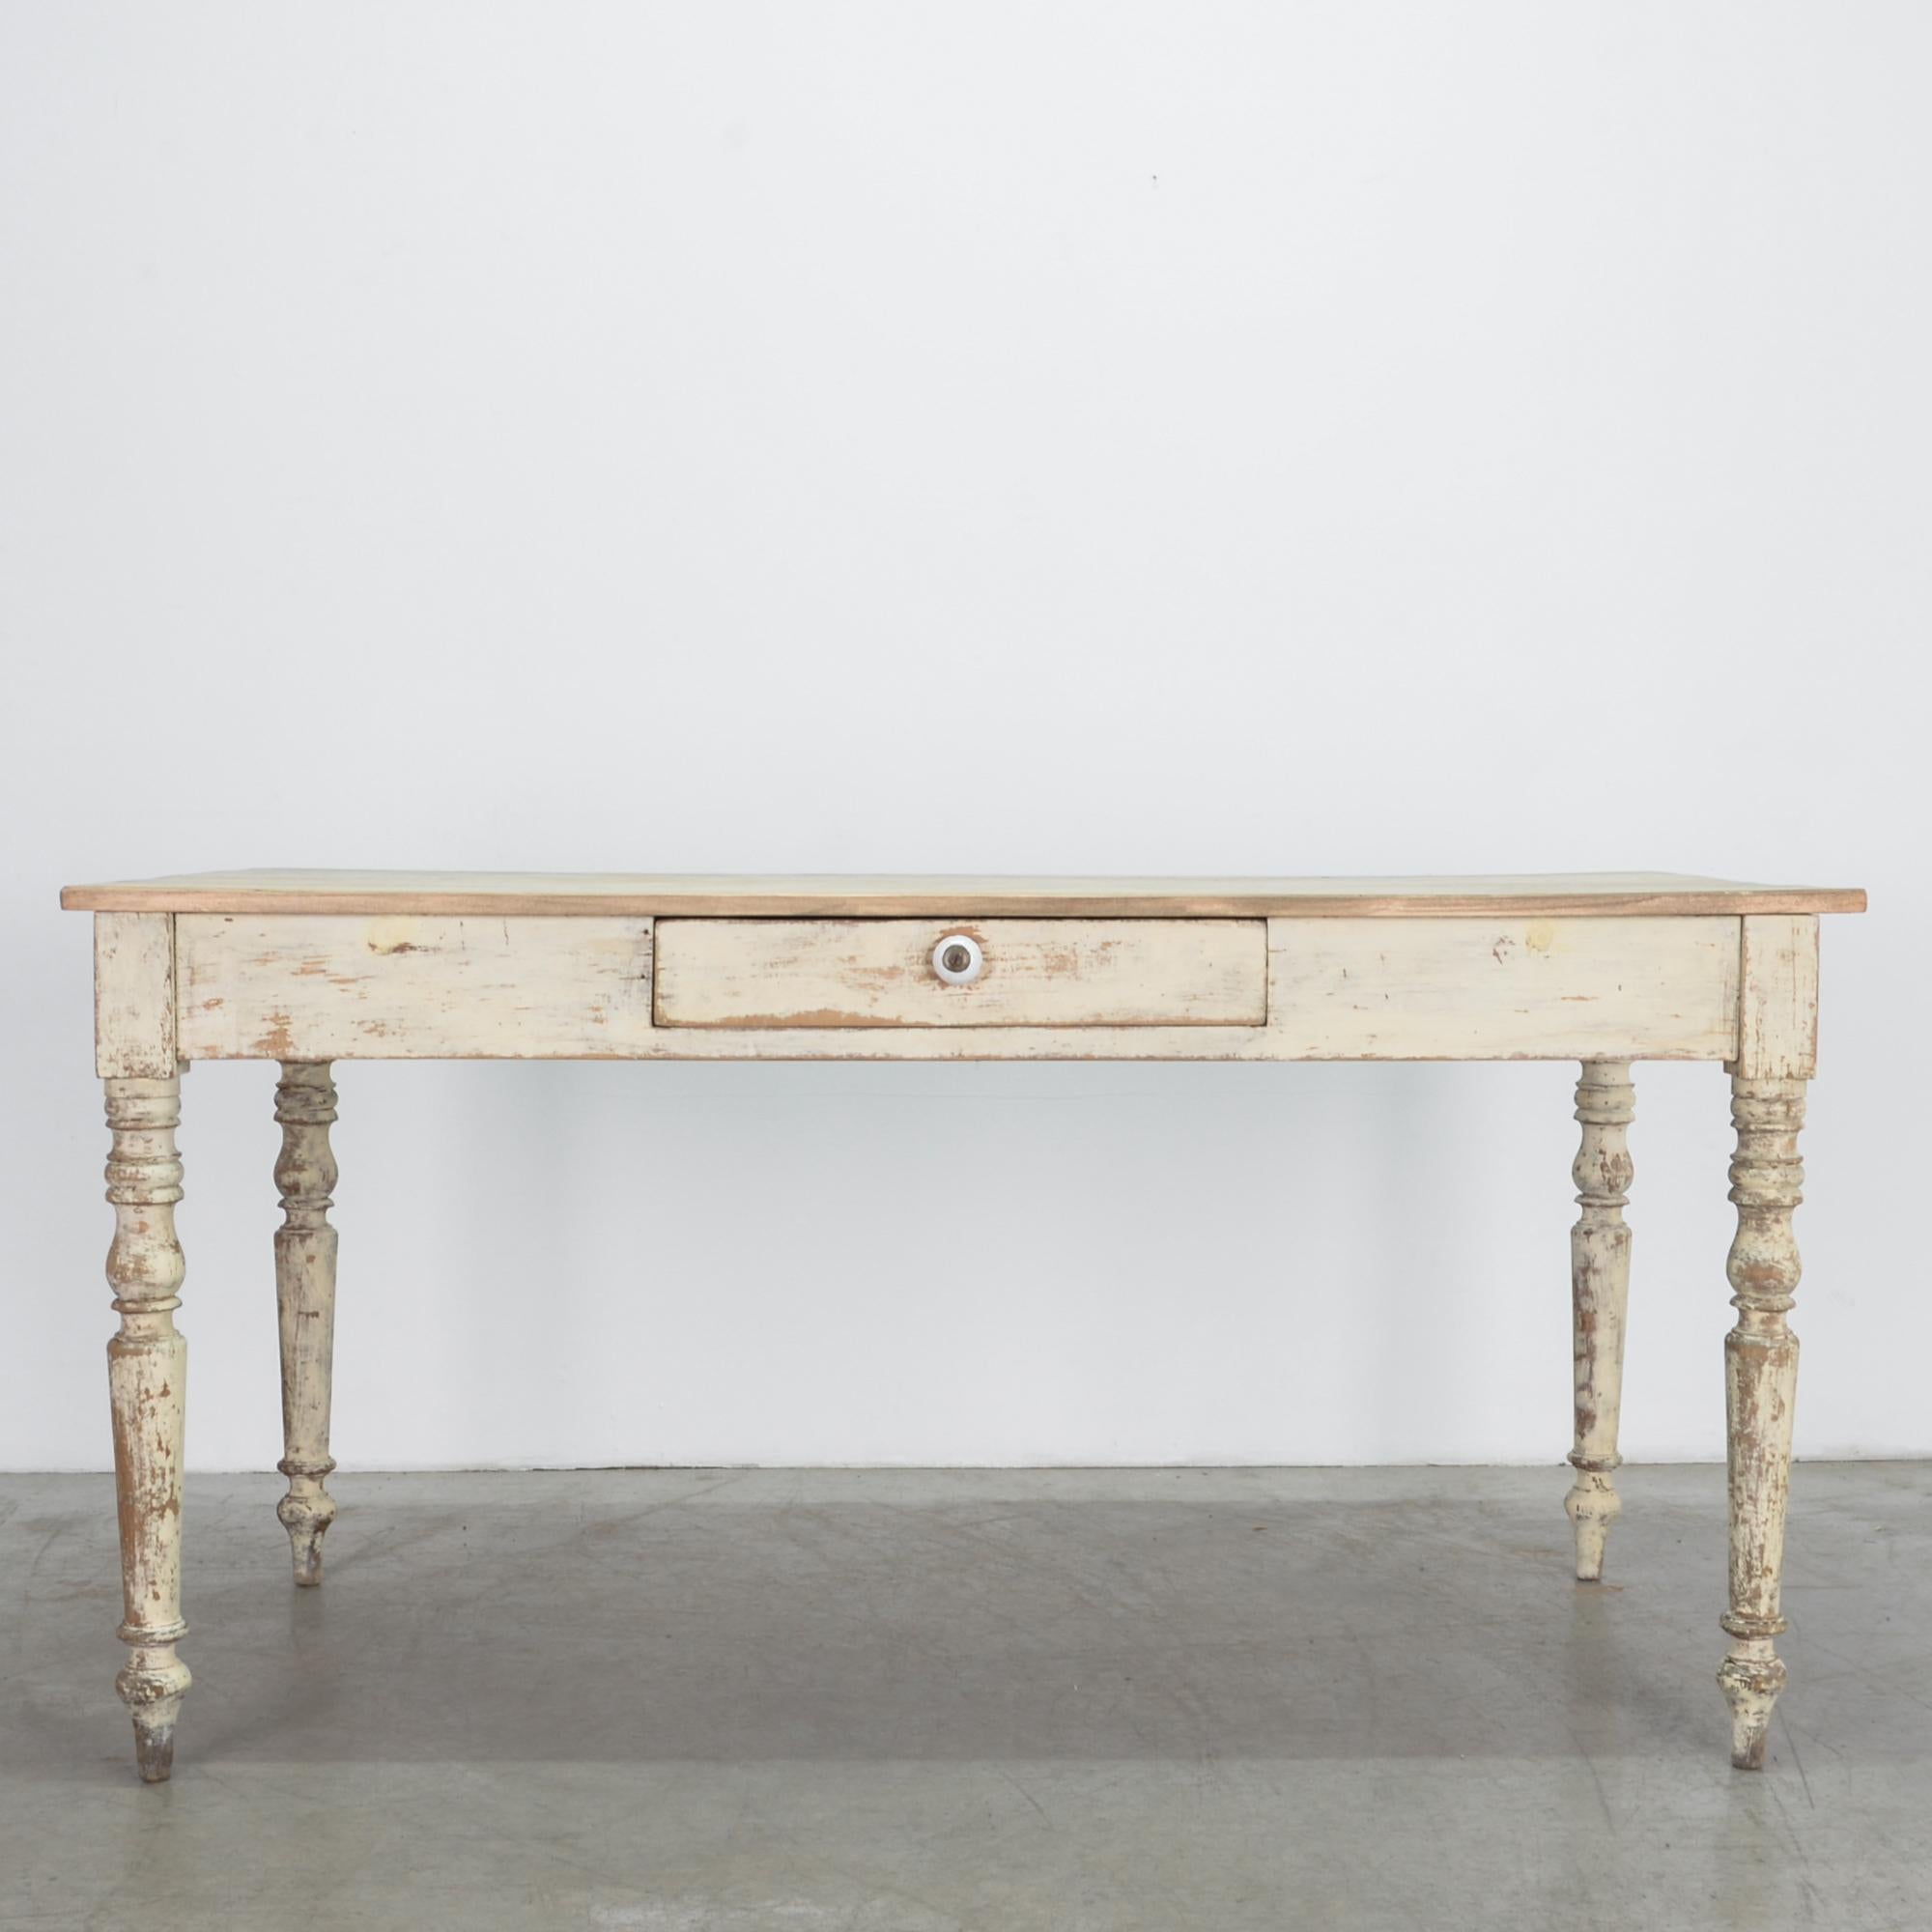 A classical influenced French provincial table with center drawer and porcelain knob. A worn patina with traces of paint and original stained finish, visible through layers gives a casual and rustic effect.